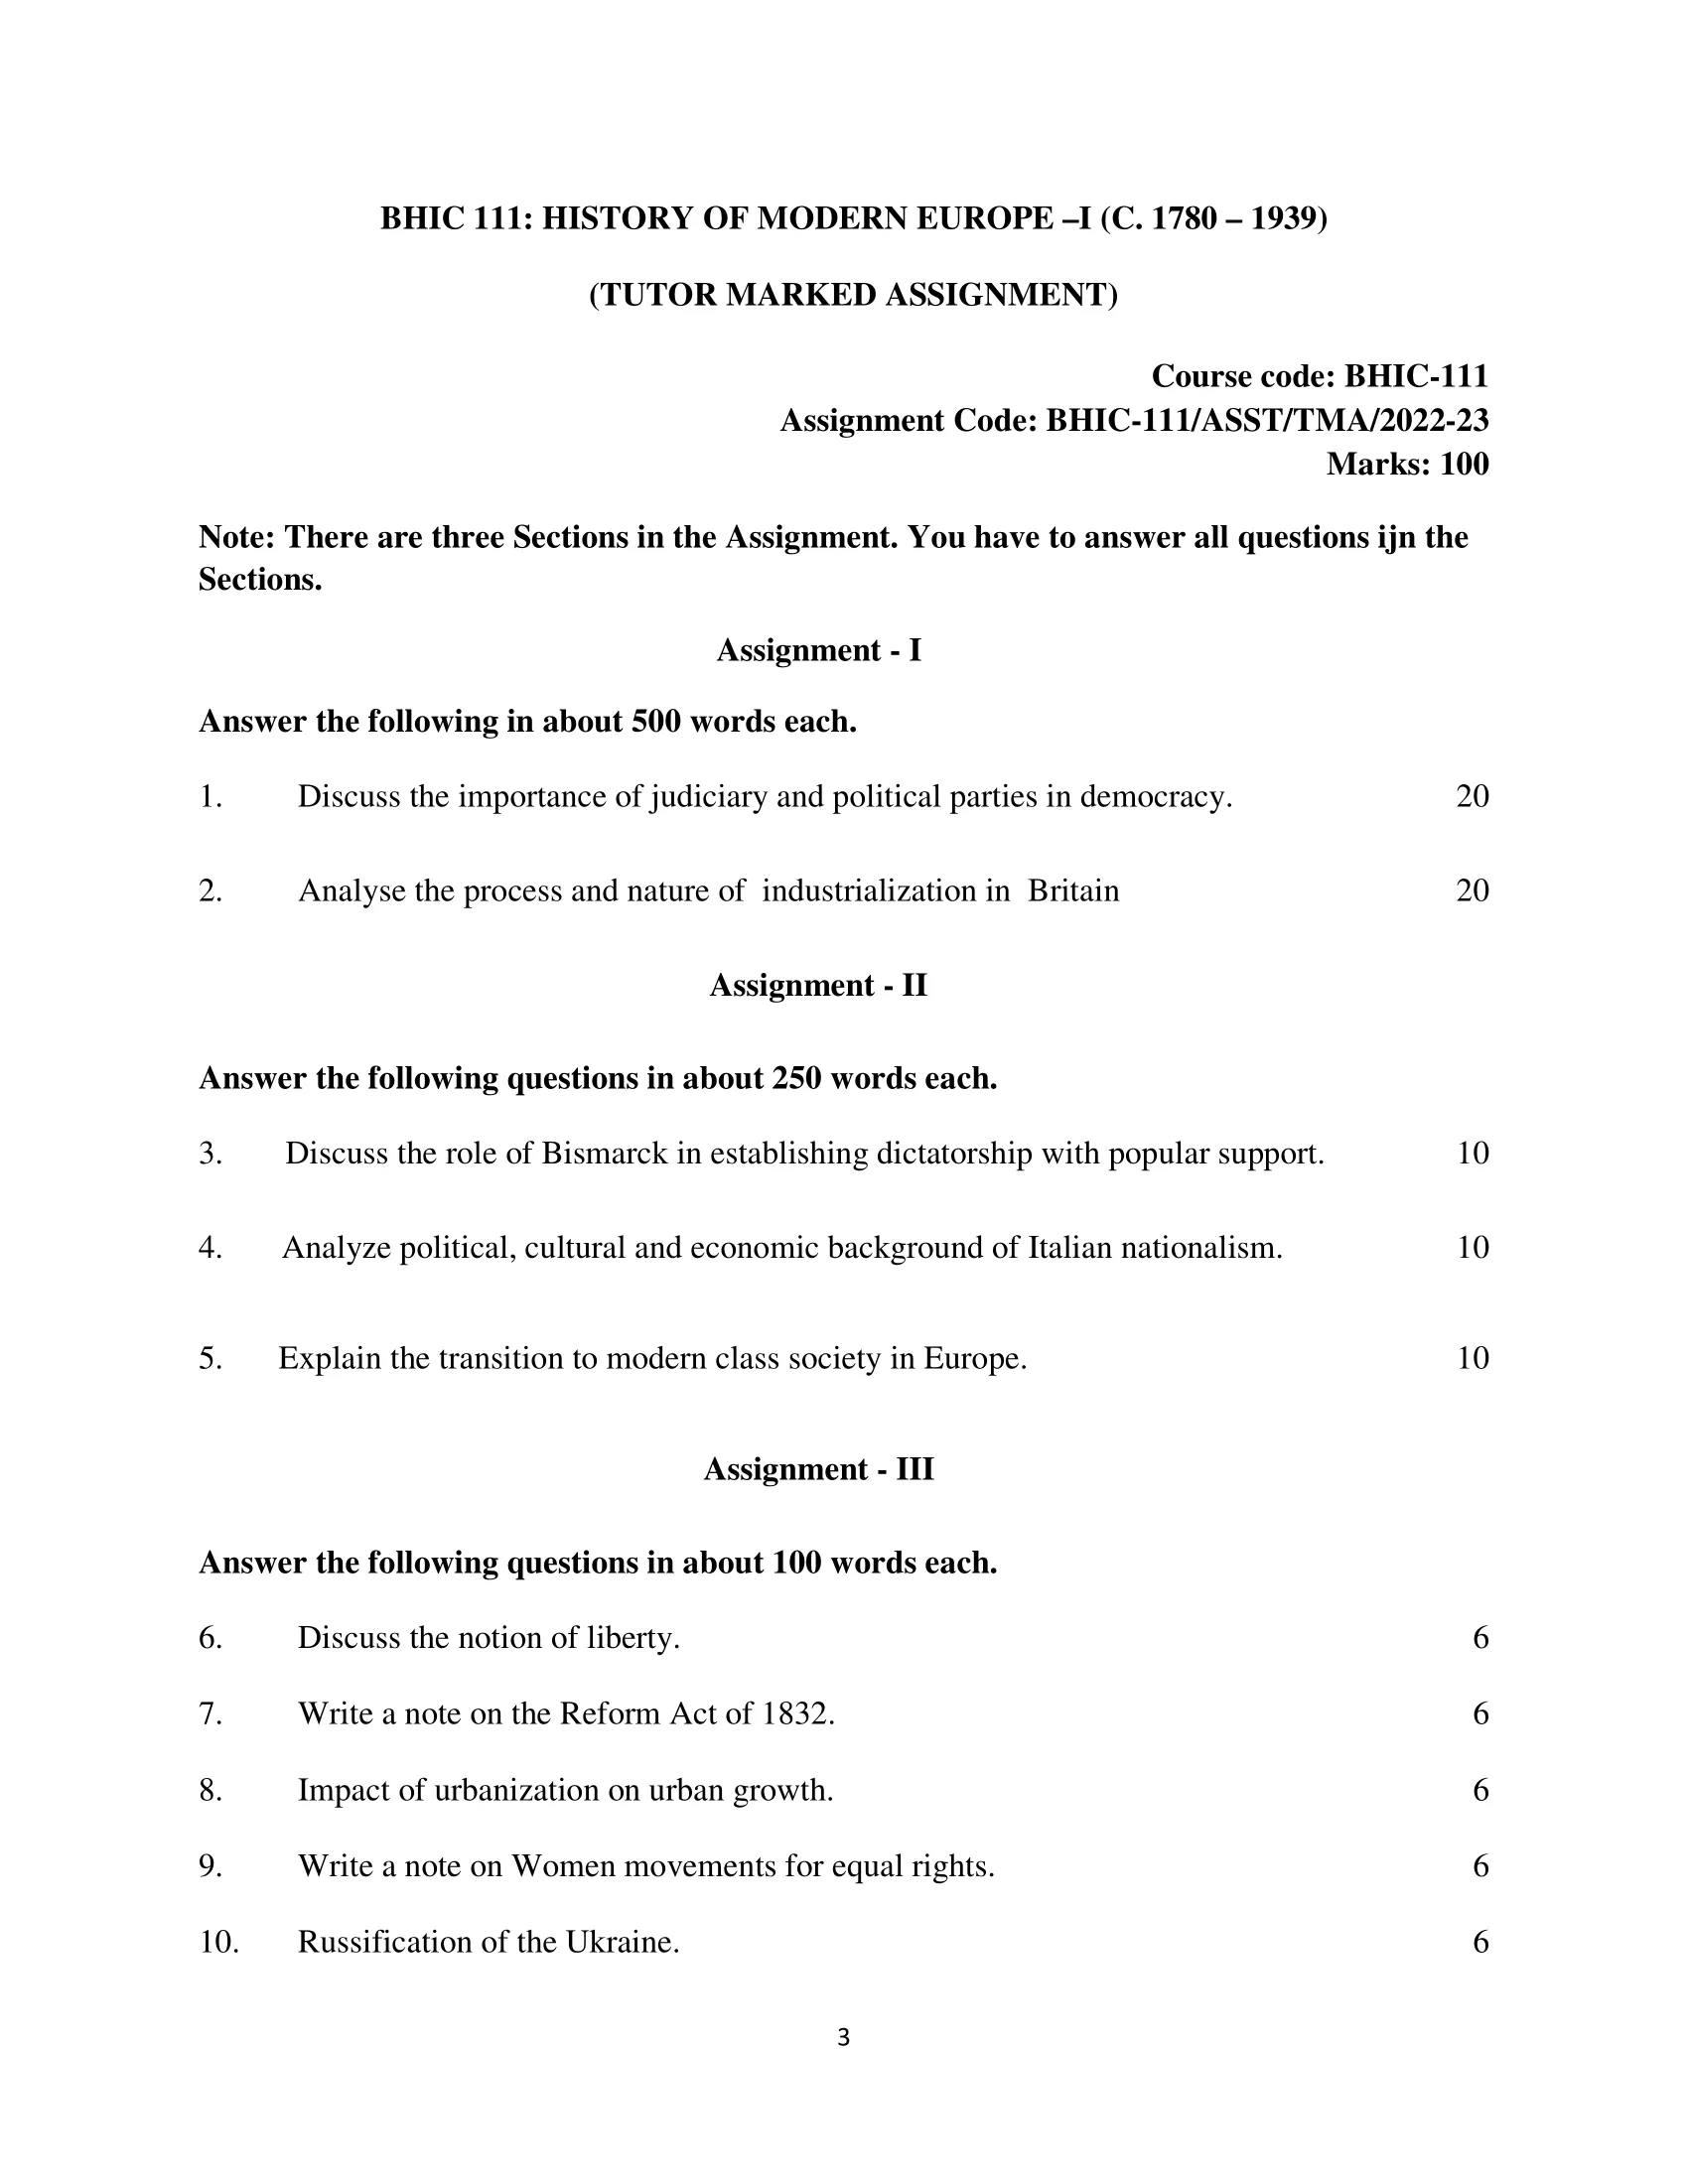 BHIC 111 IGNOU Solved Assignment 2022-2023 HISTORY OF MODERN EUROPE –I